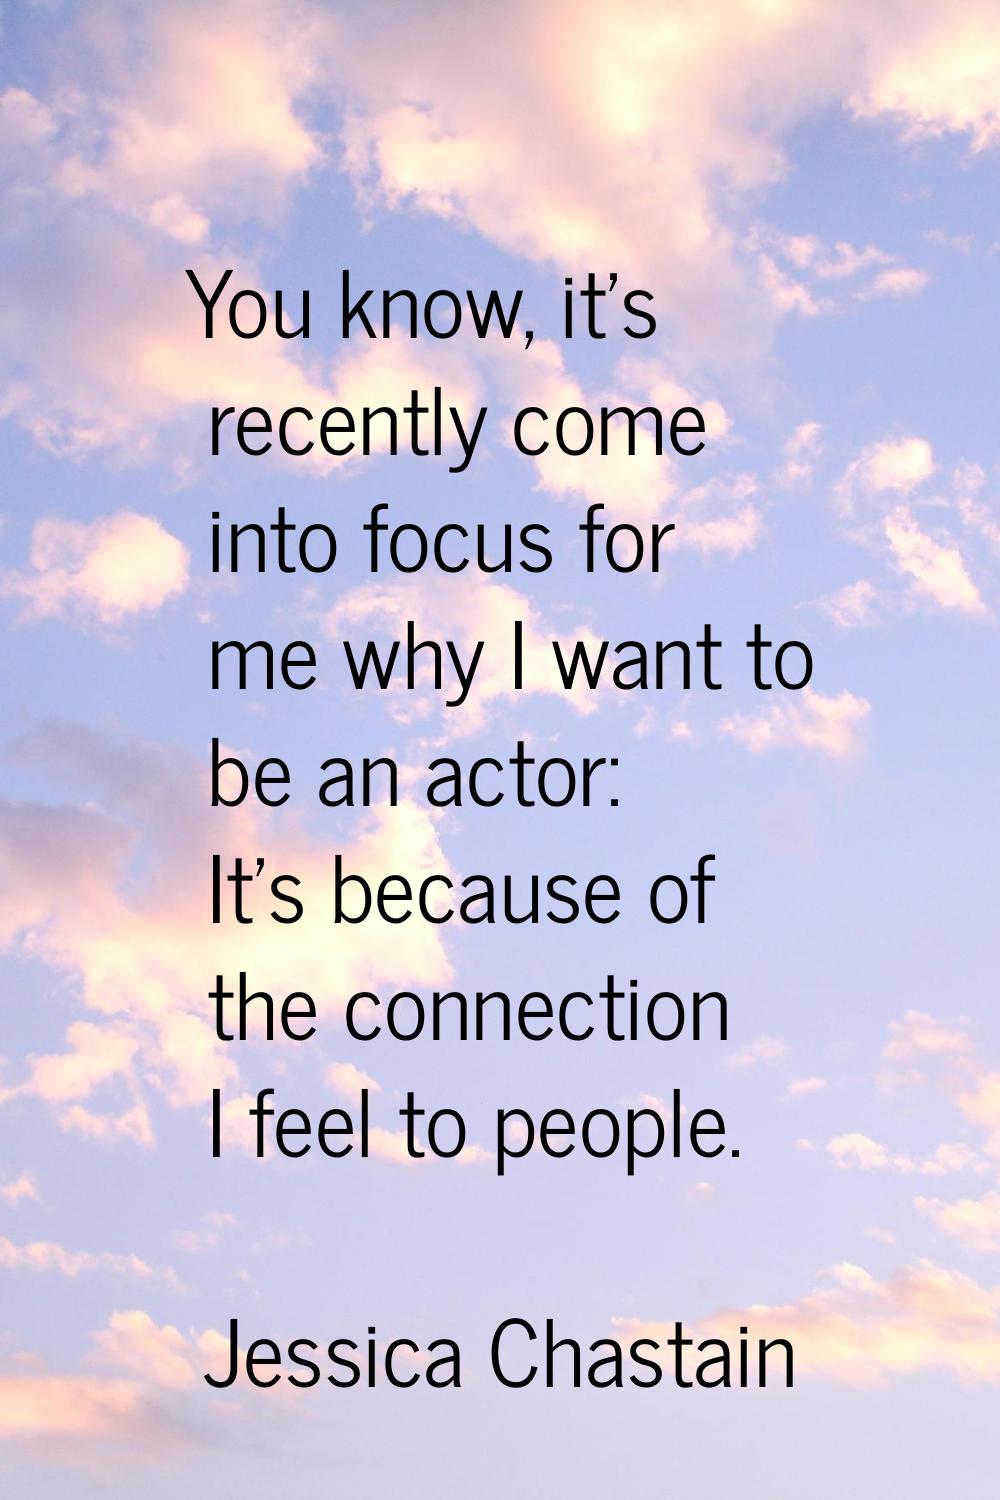 You know, it's recently come into focus for me why I want to be an actor: It's because of the conne